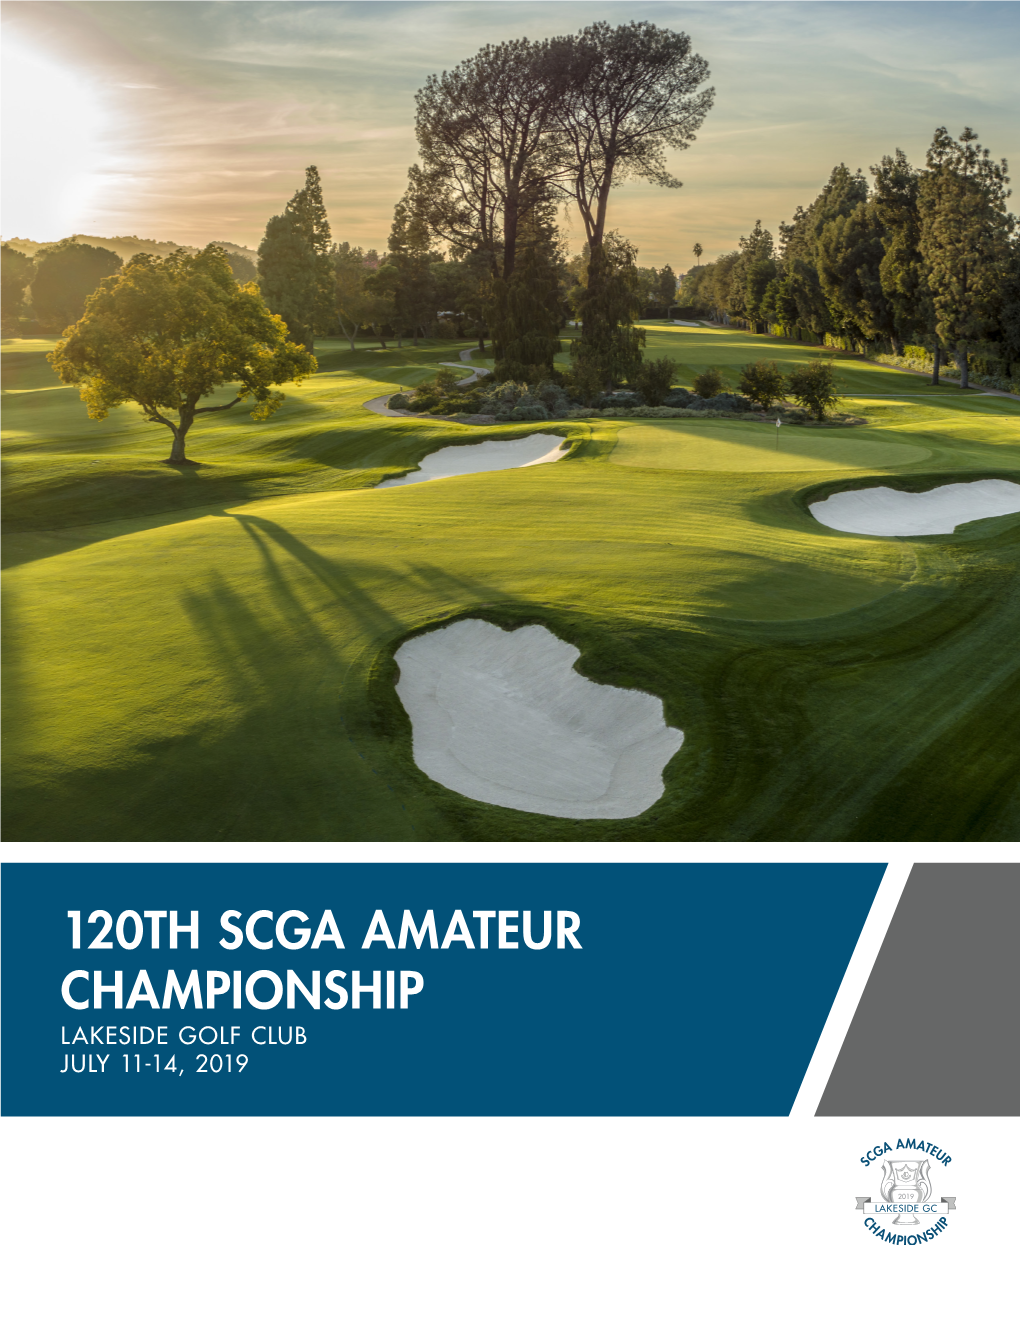 120Th Scga Amateur Championship Lakeside Golf Club July 11-14, 2019 Contents Welcome